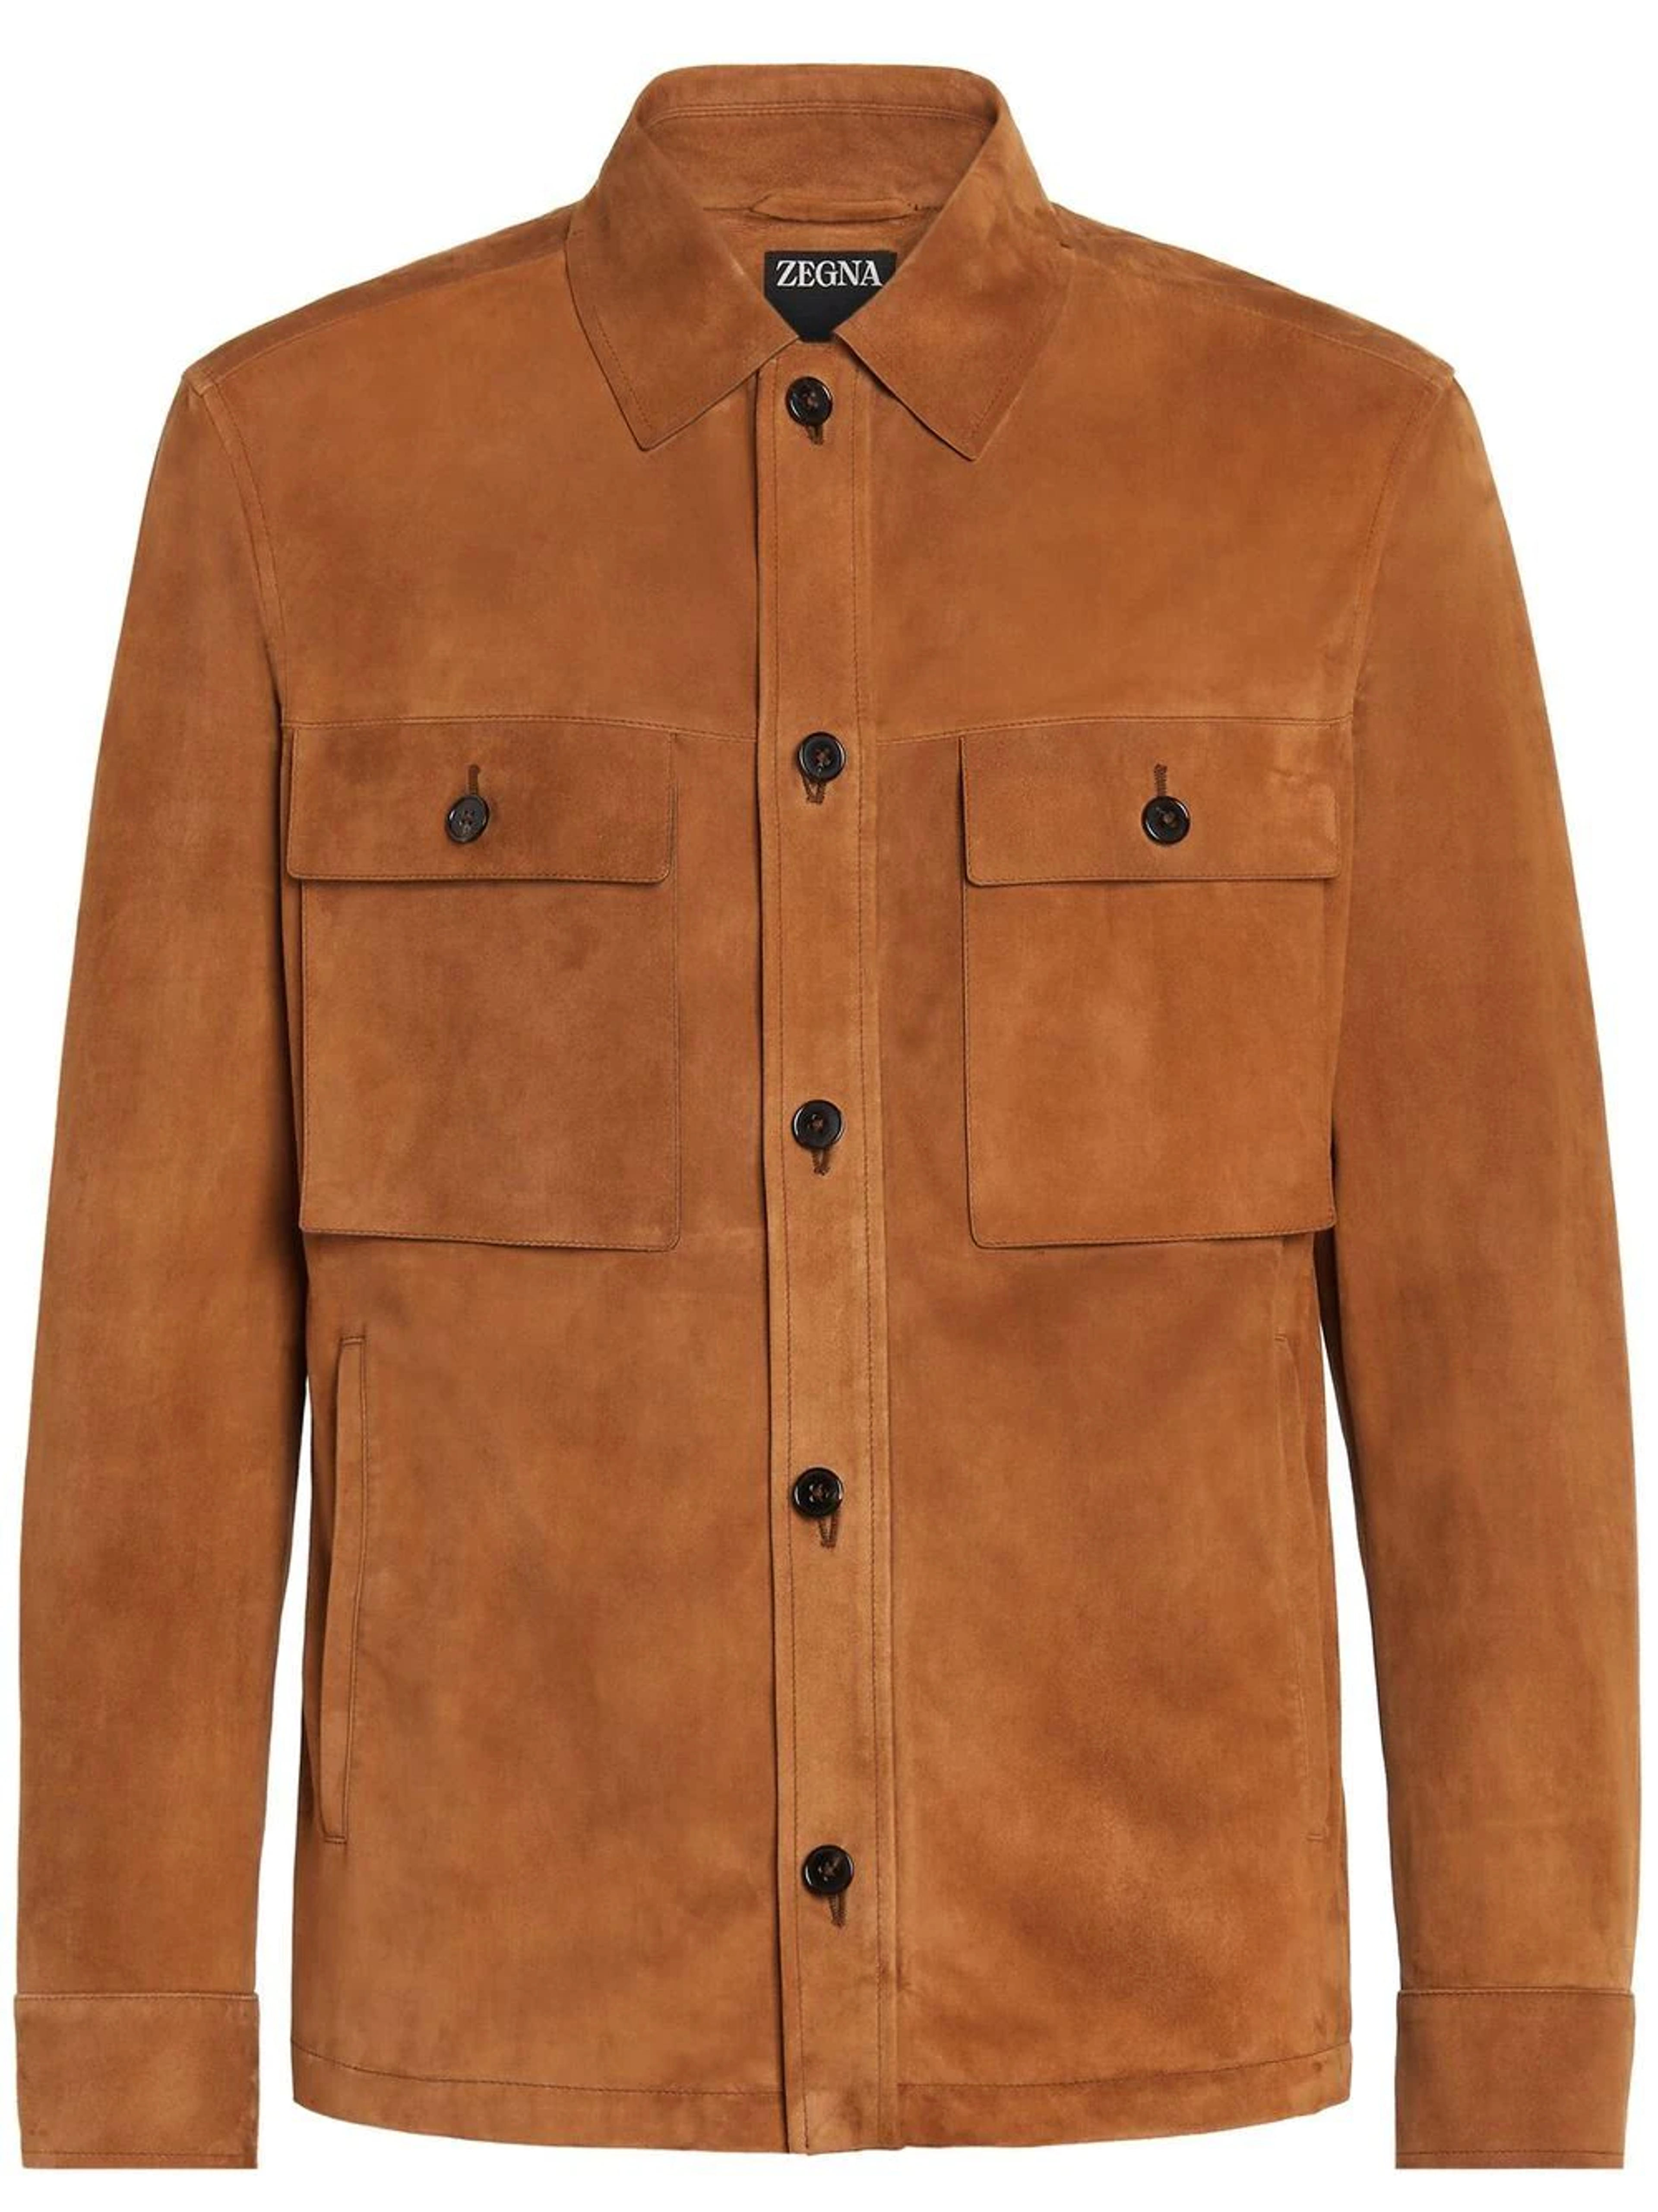 Zegna Buttoned Suede Overshirt - Farfetch